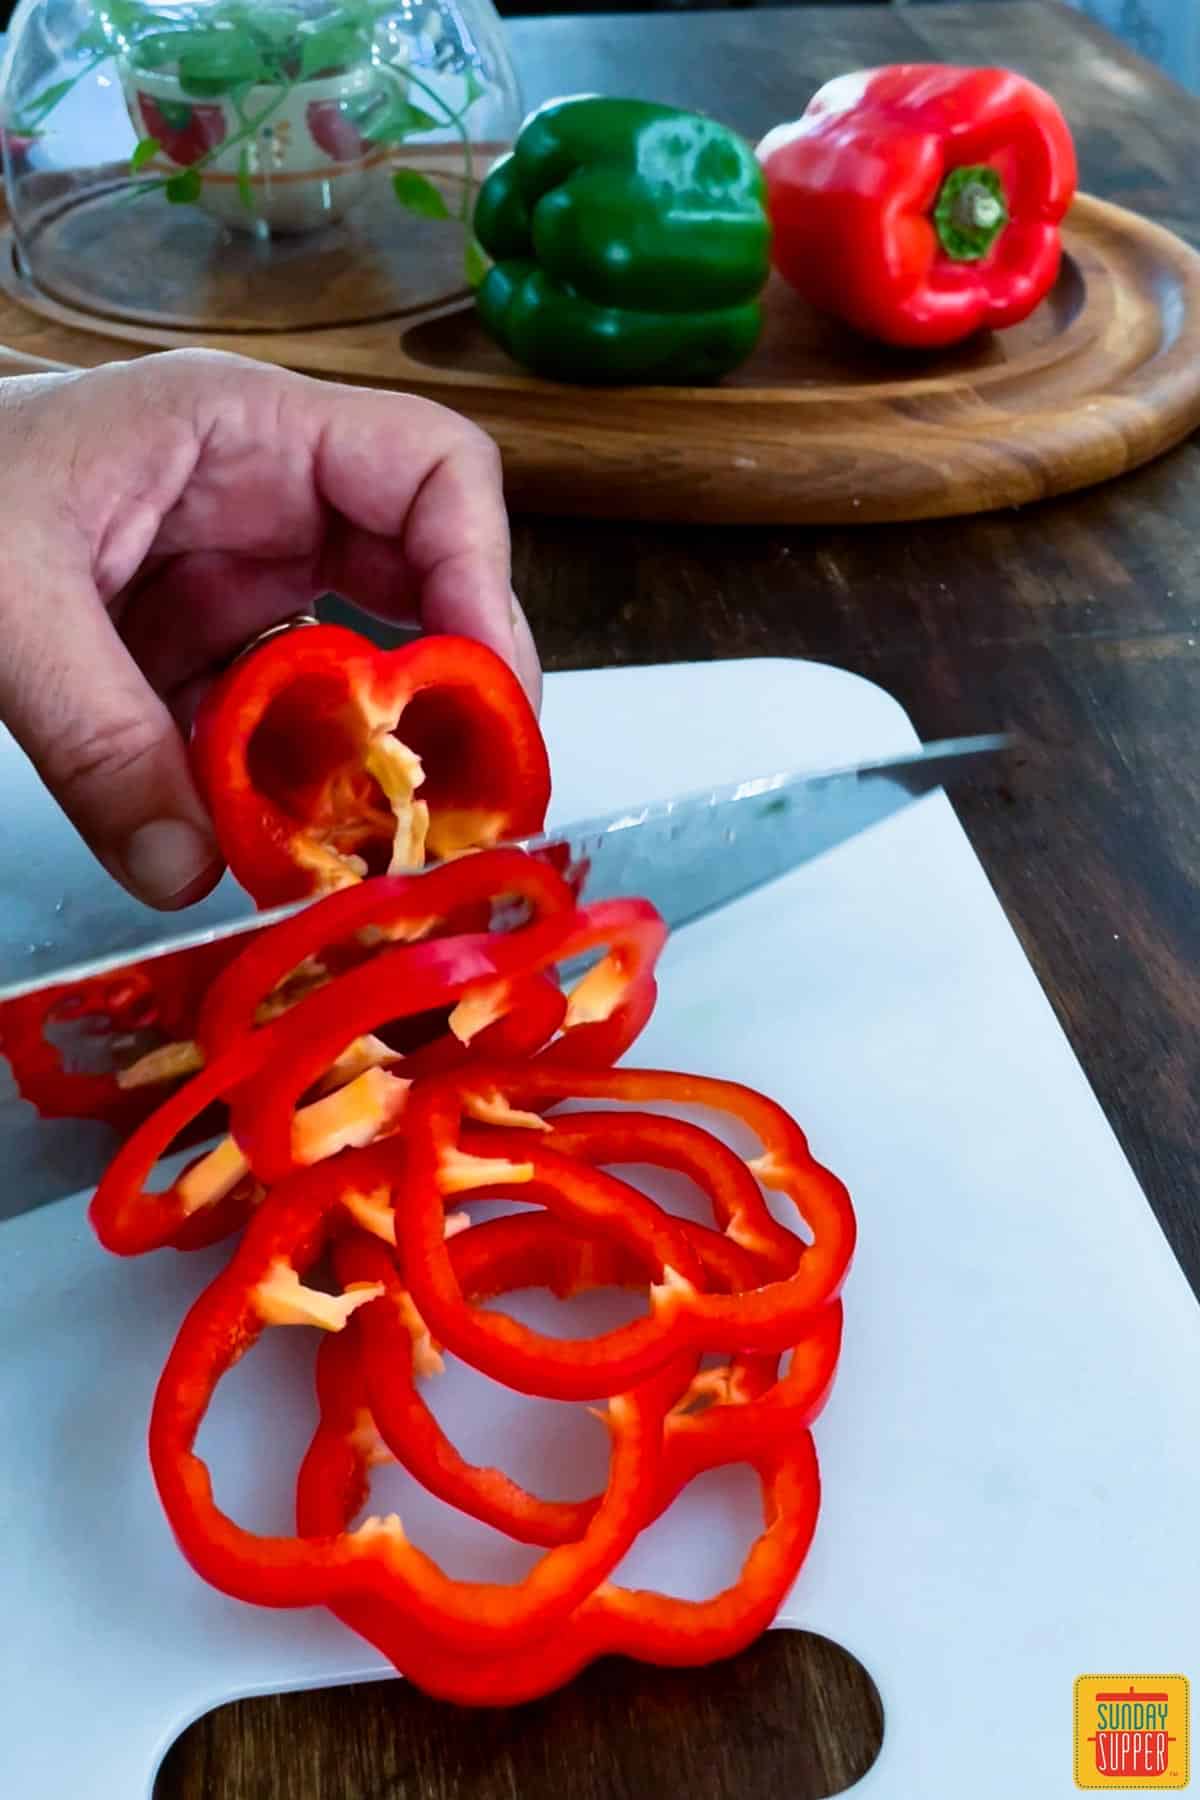 Slicing red bell peppers on a cutting board